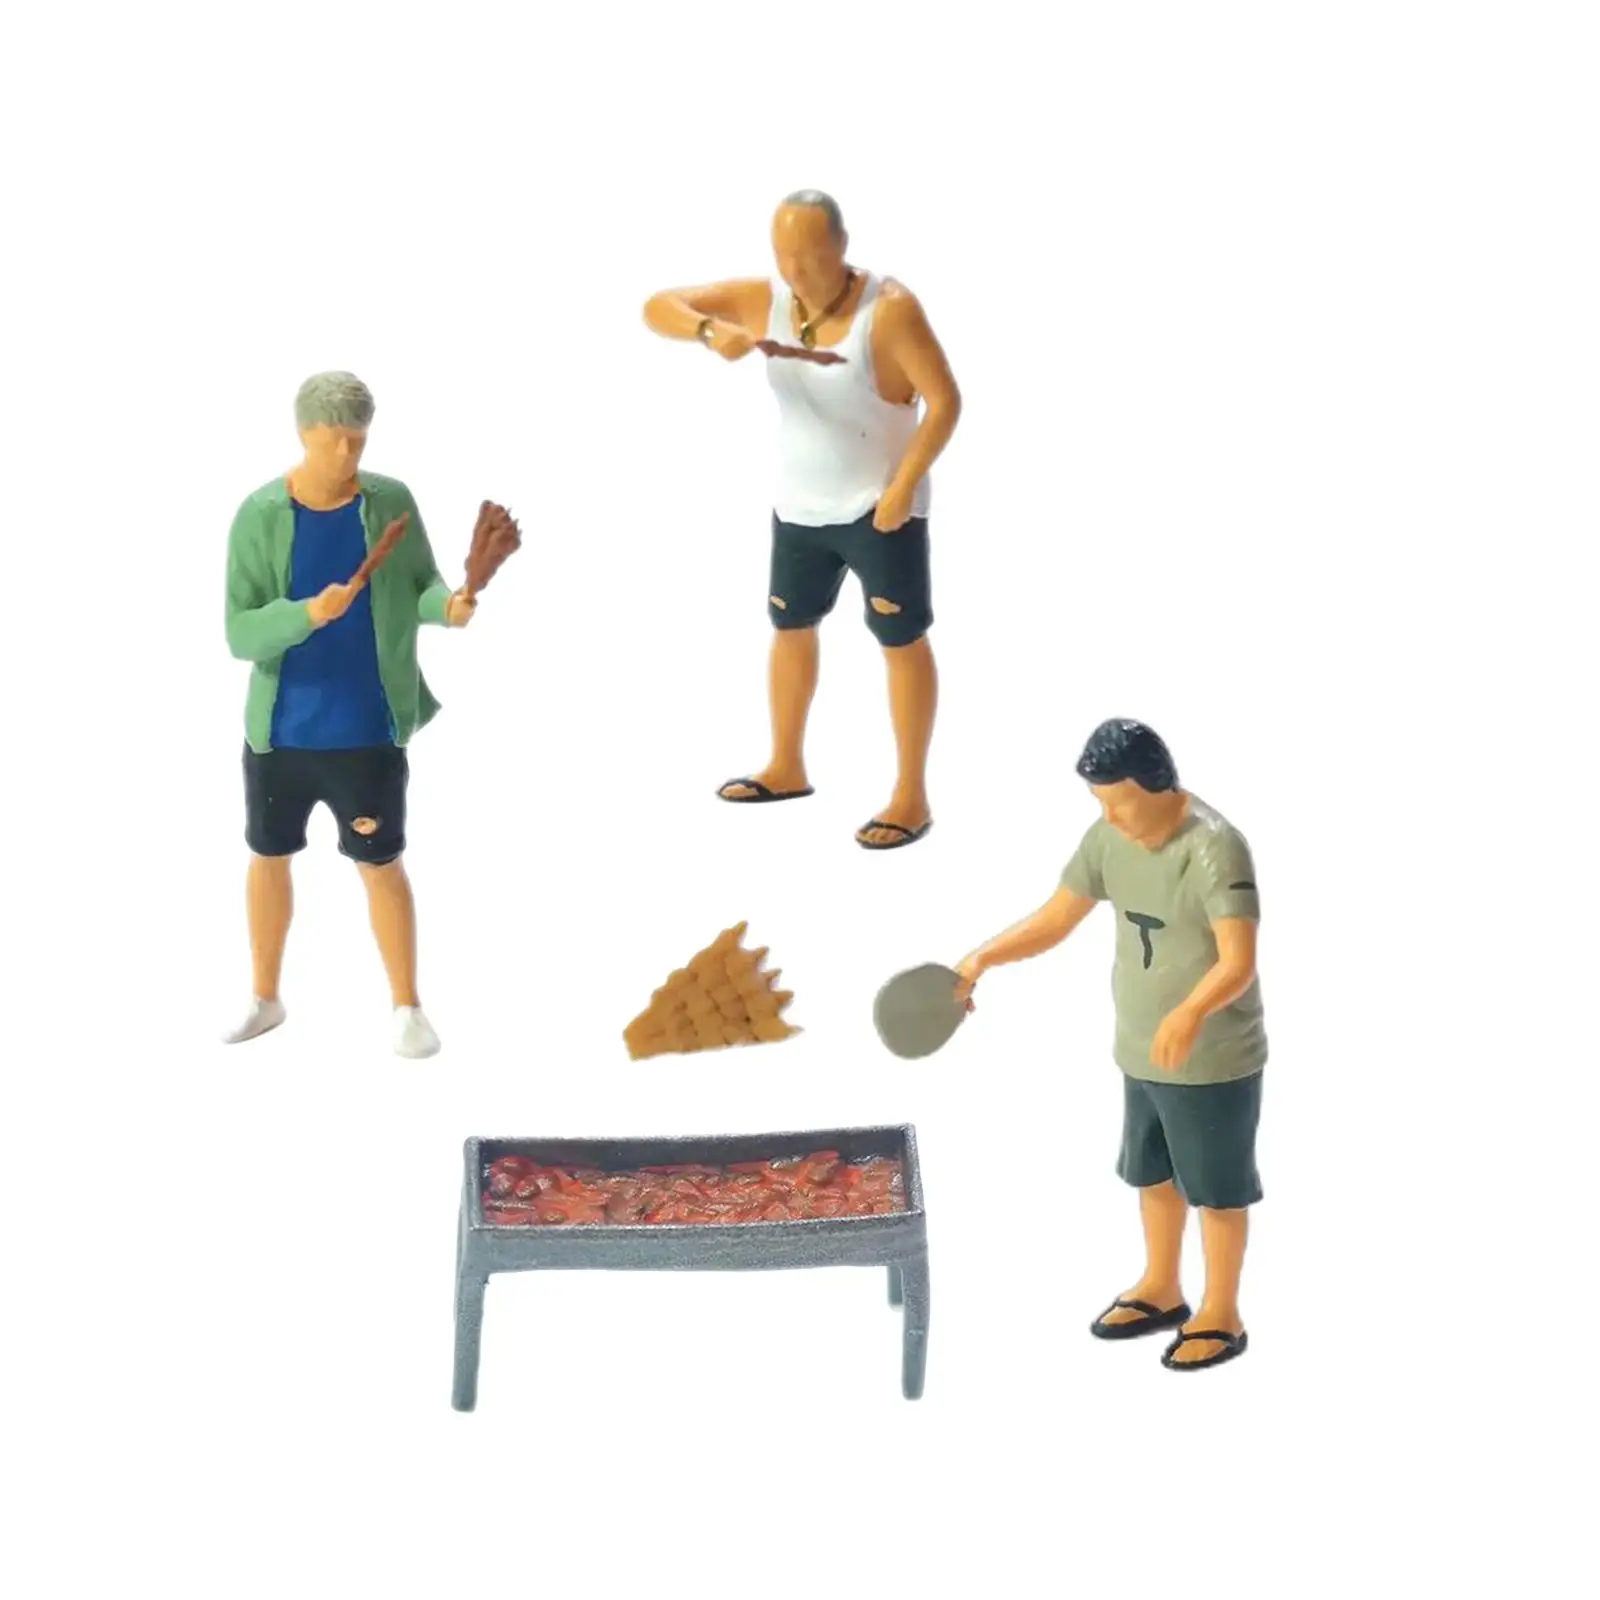 5x 1/64 BBQ Figure Model Set Collections Trains Architectural S Gauge Layout Decoration Hand Painted Figurines Decoration